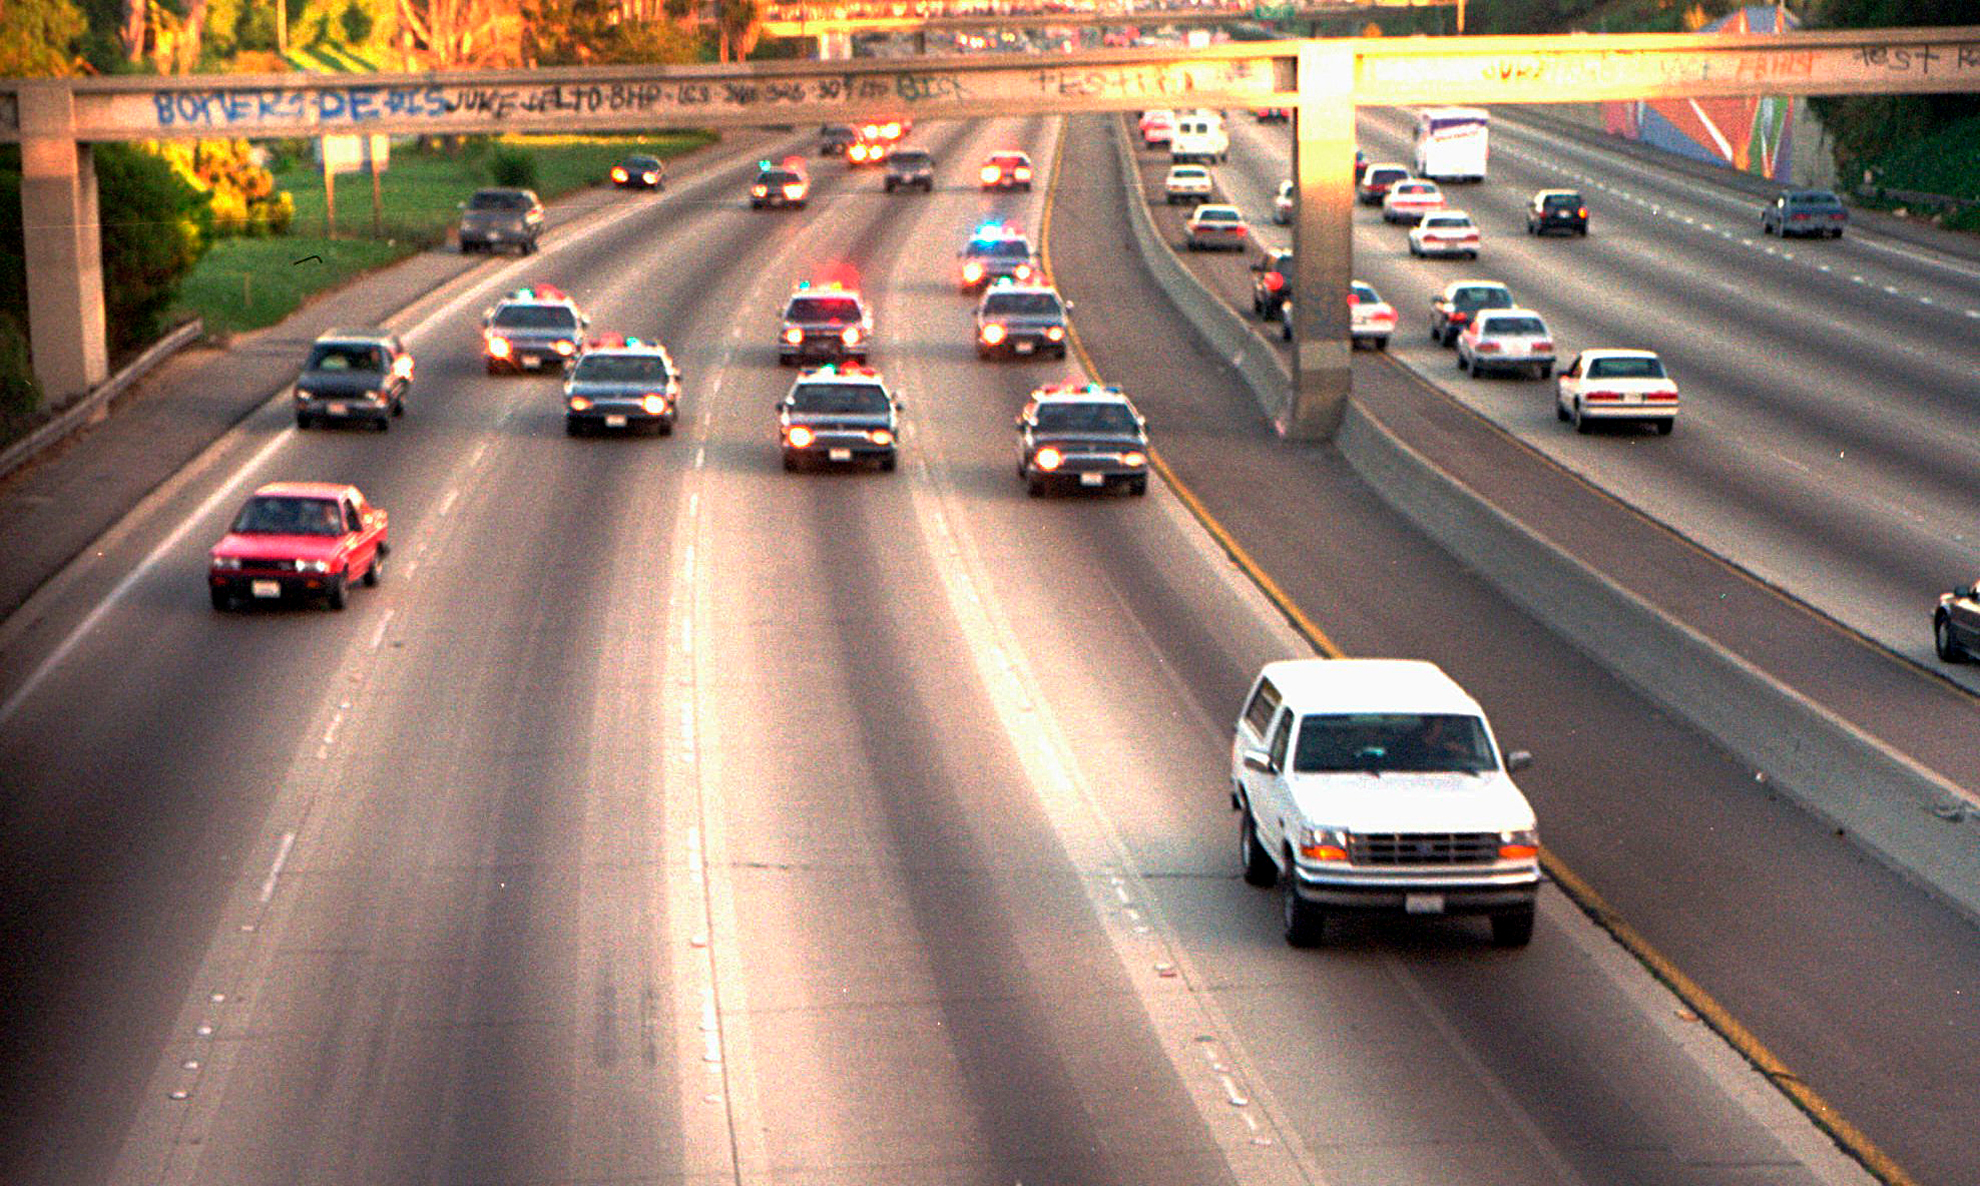 A white Ford Bronco driven by Al Cowlings and carrying O.J. Simpson is trailed by Los Angeles police cars as it travels on a freeway in Los Angeles on June 17, 1994.